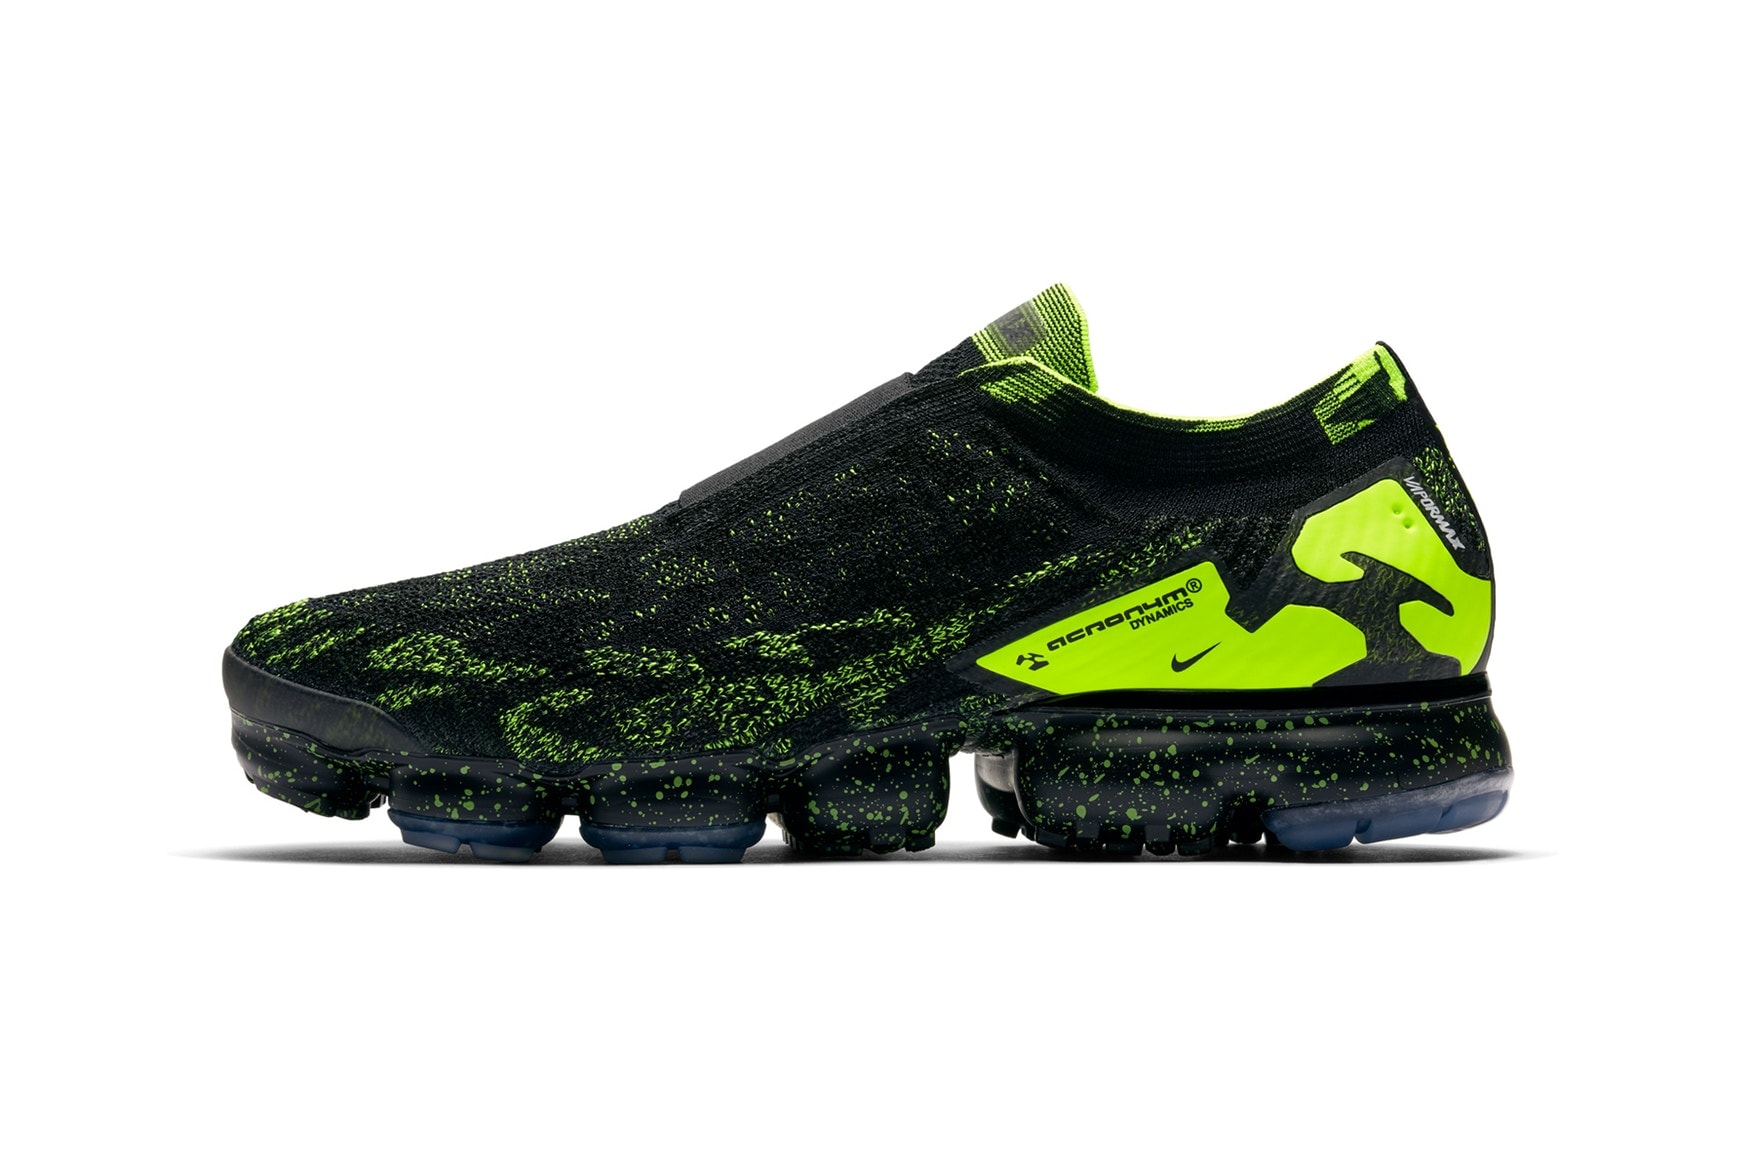 ACRONYM x Nike Air VaporMax Moc 2 Air Max Day footwear release dates 2018 march Errolson Hugh Johnny's Icy Passage The Illusional Ja Thirsty Bandit where to buy